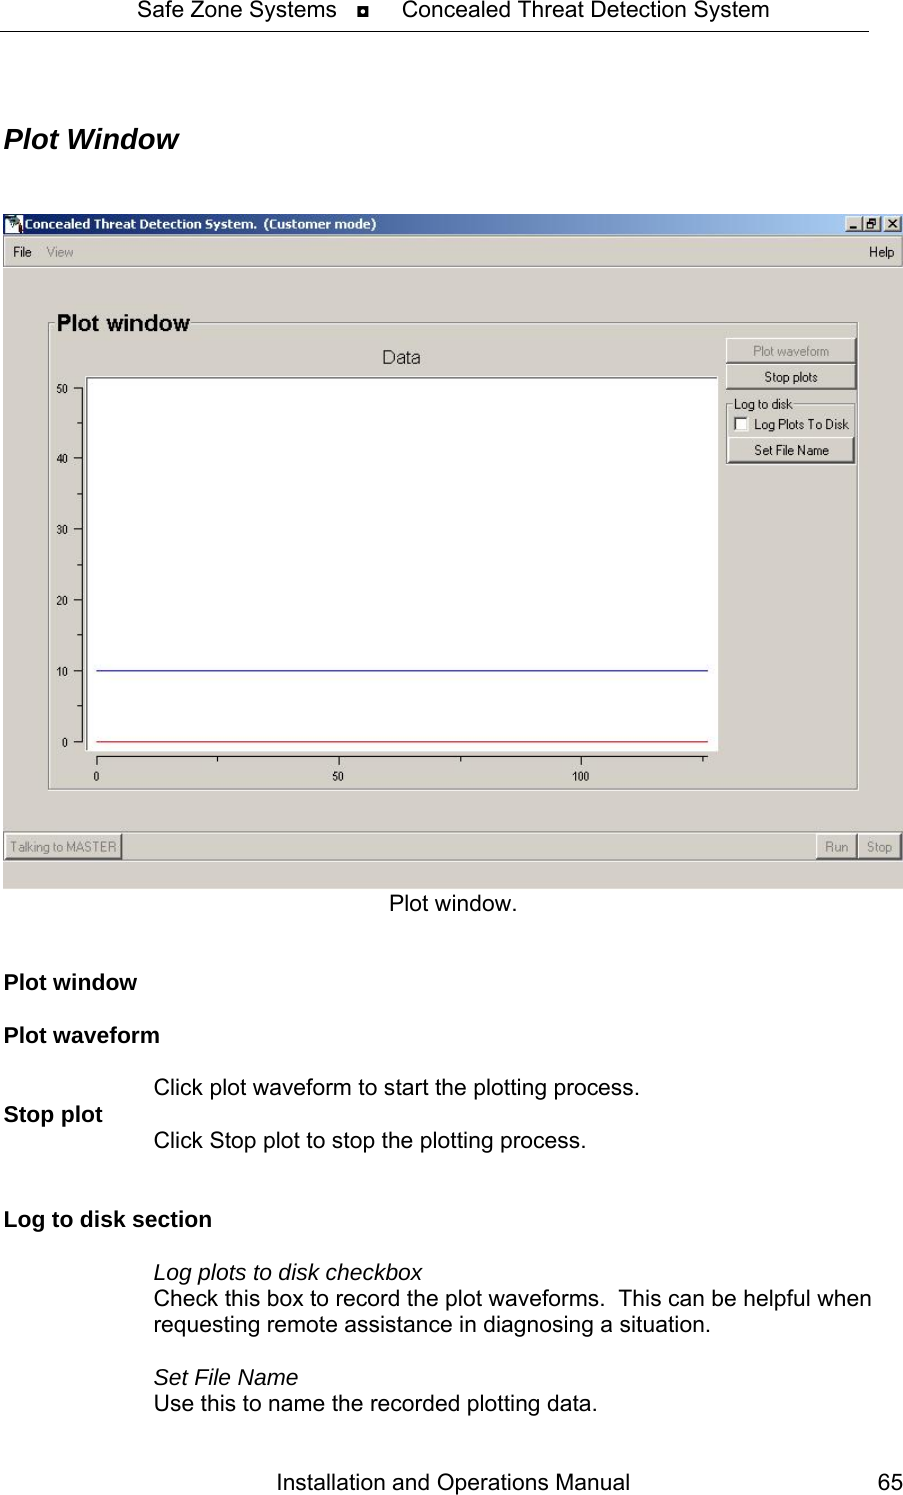 Safe Zone Systems   ◘     Concealed Threat Detection System   Plot Window    Plot window.   Plot window  Plot waveform    Click plot waveform to start the plotting process. Stop plot    Click Stop plot to stop the plotting process.   Log to disk section    Log plots to disk checkbox   Check this box to record the plot waveforms.  This can be helpful when      requesting remote assistance in diagnosing a situation.    Set File Name   Use this to name the recorded plotting data. Installation and Operations Manual  65